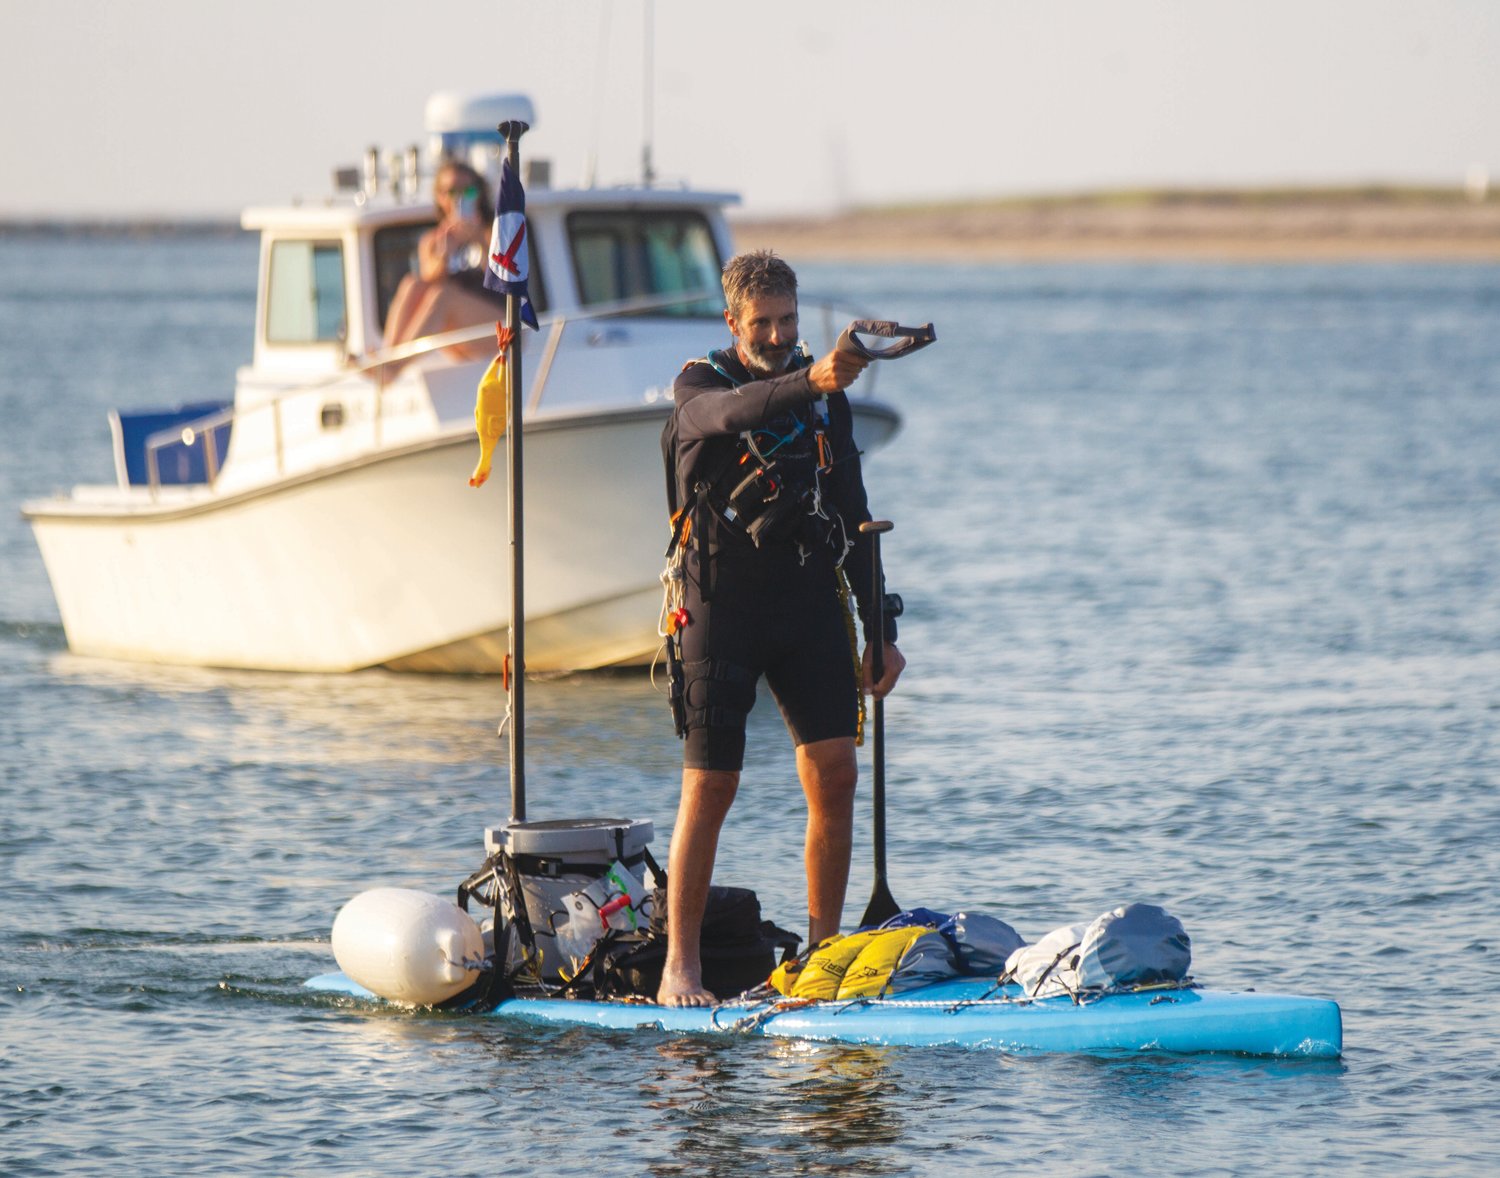 Adam Nagler tips his cap to a crowd at Brant Point at the completion of his 450-mile solo paddleboard journey last summer. He is planning to set out on a new trip this week.